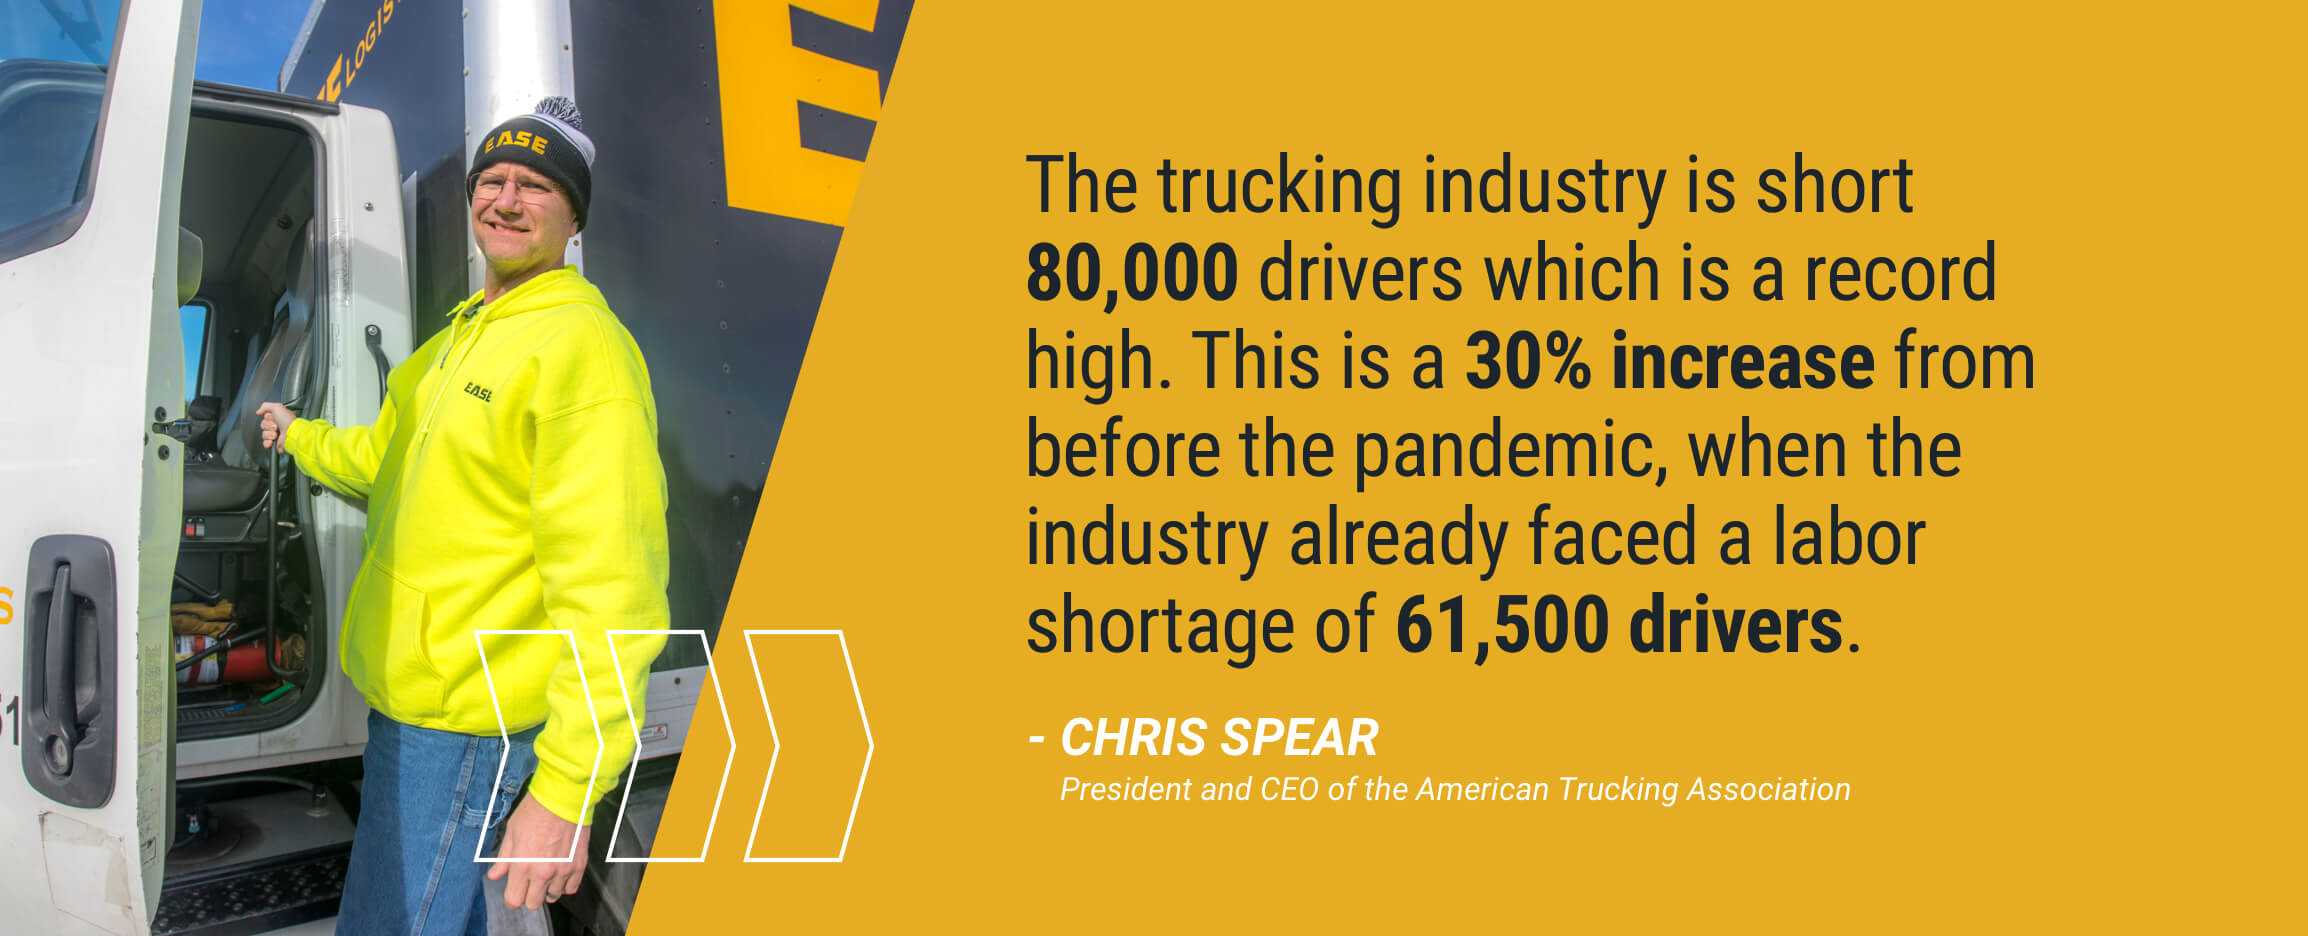 The trucking industry is short 80,000 drivers which is a record high. This is a 30% increase from before the pandemic, when the industry already faced a labor shortage of 61,500 drivers. Chris Spear, President and CEO of the American Trucking Association